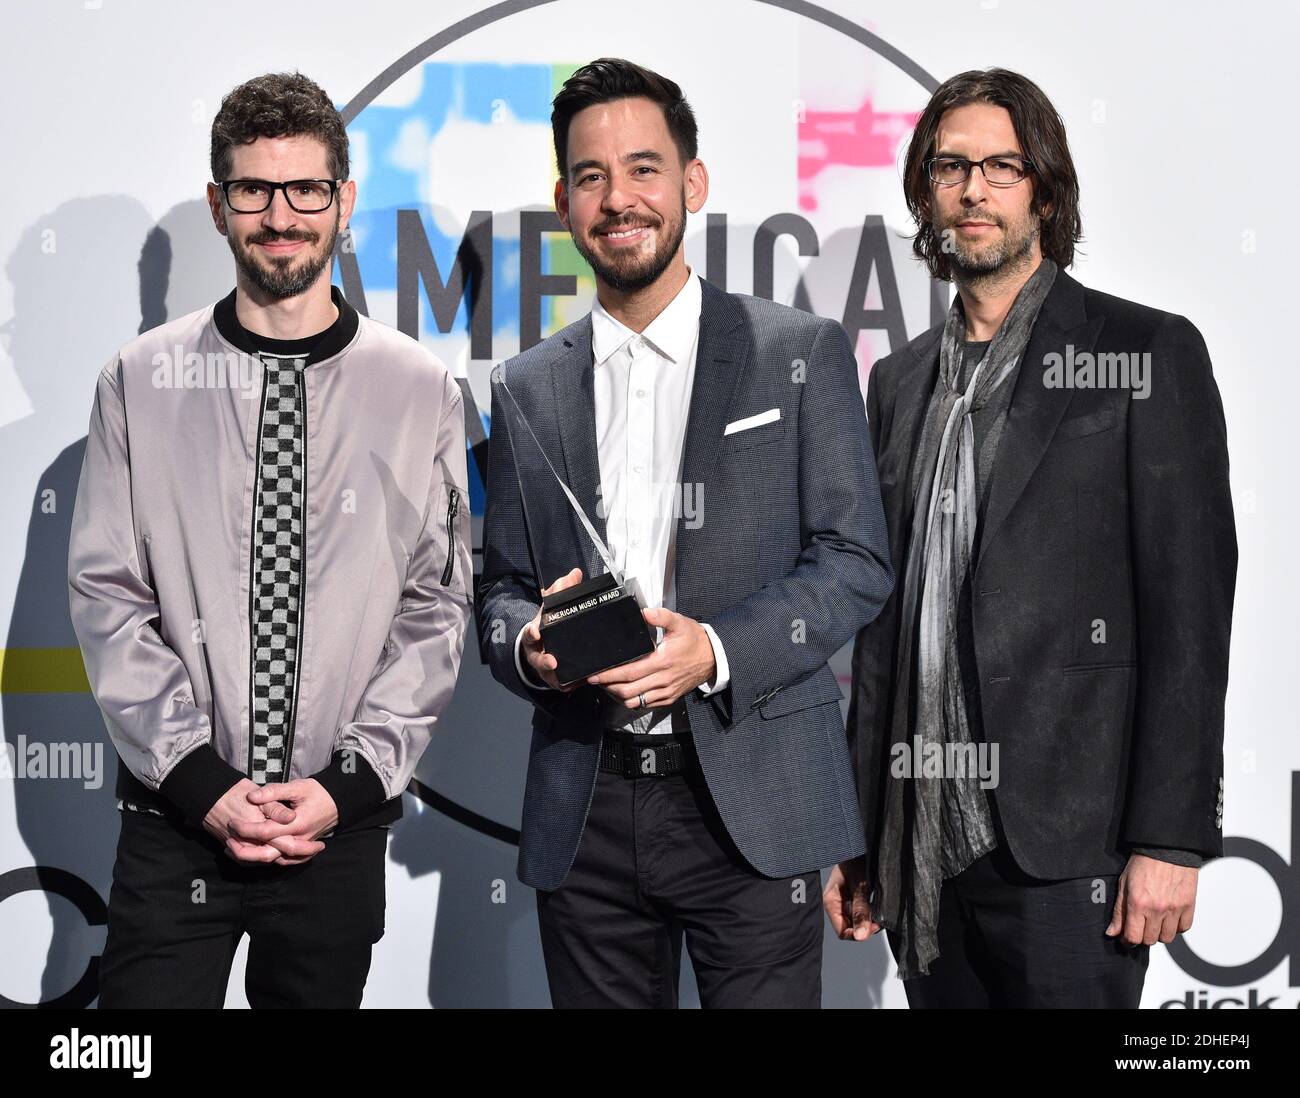 Brad Delson, Mike Shinoda, and Rob Bourdon of the band Linkin Park pose in the press room during the 2017 American Music Awards at Microsoft Theater on November 19, 2017 in Los Angeles, CA, USA. Photo by Lionel Hahn/ABACAPRESS.COM Stock Photo